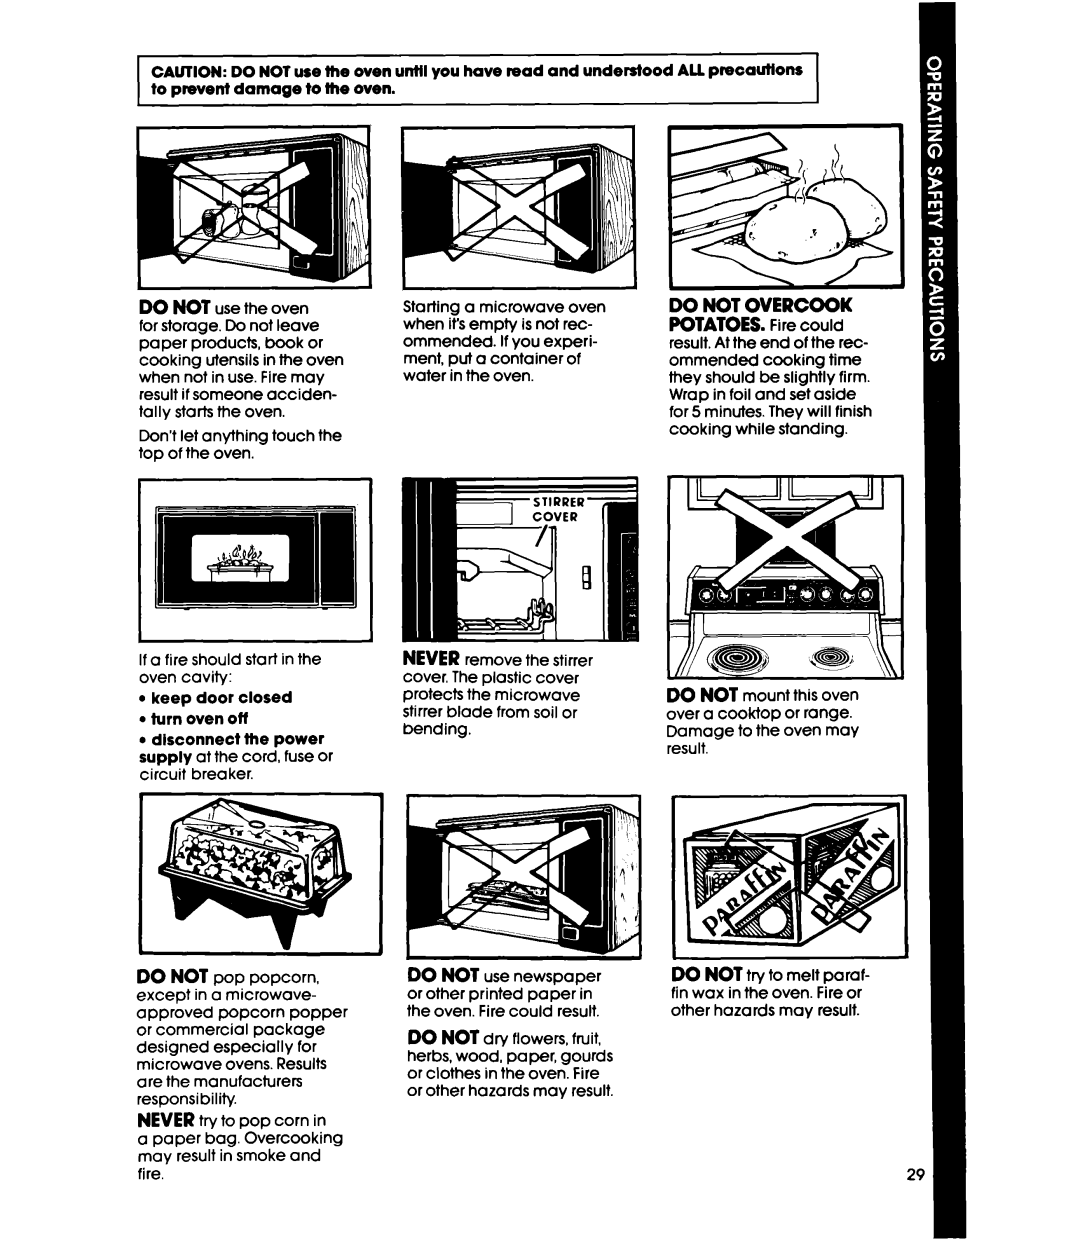 Whirlpool MW36OOXS manual Don’t let anything touch the top of the oven 